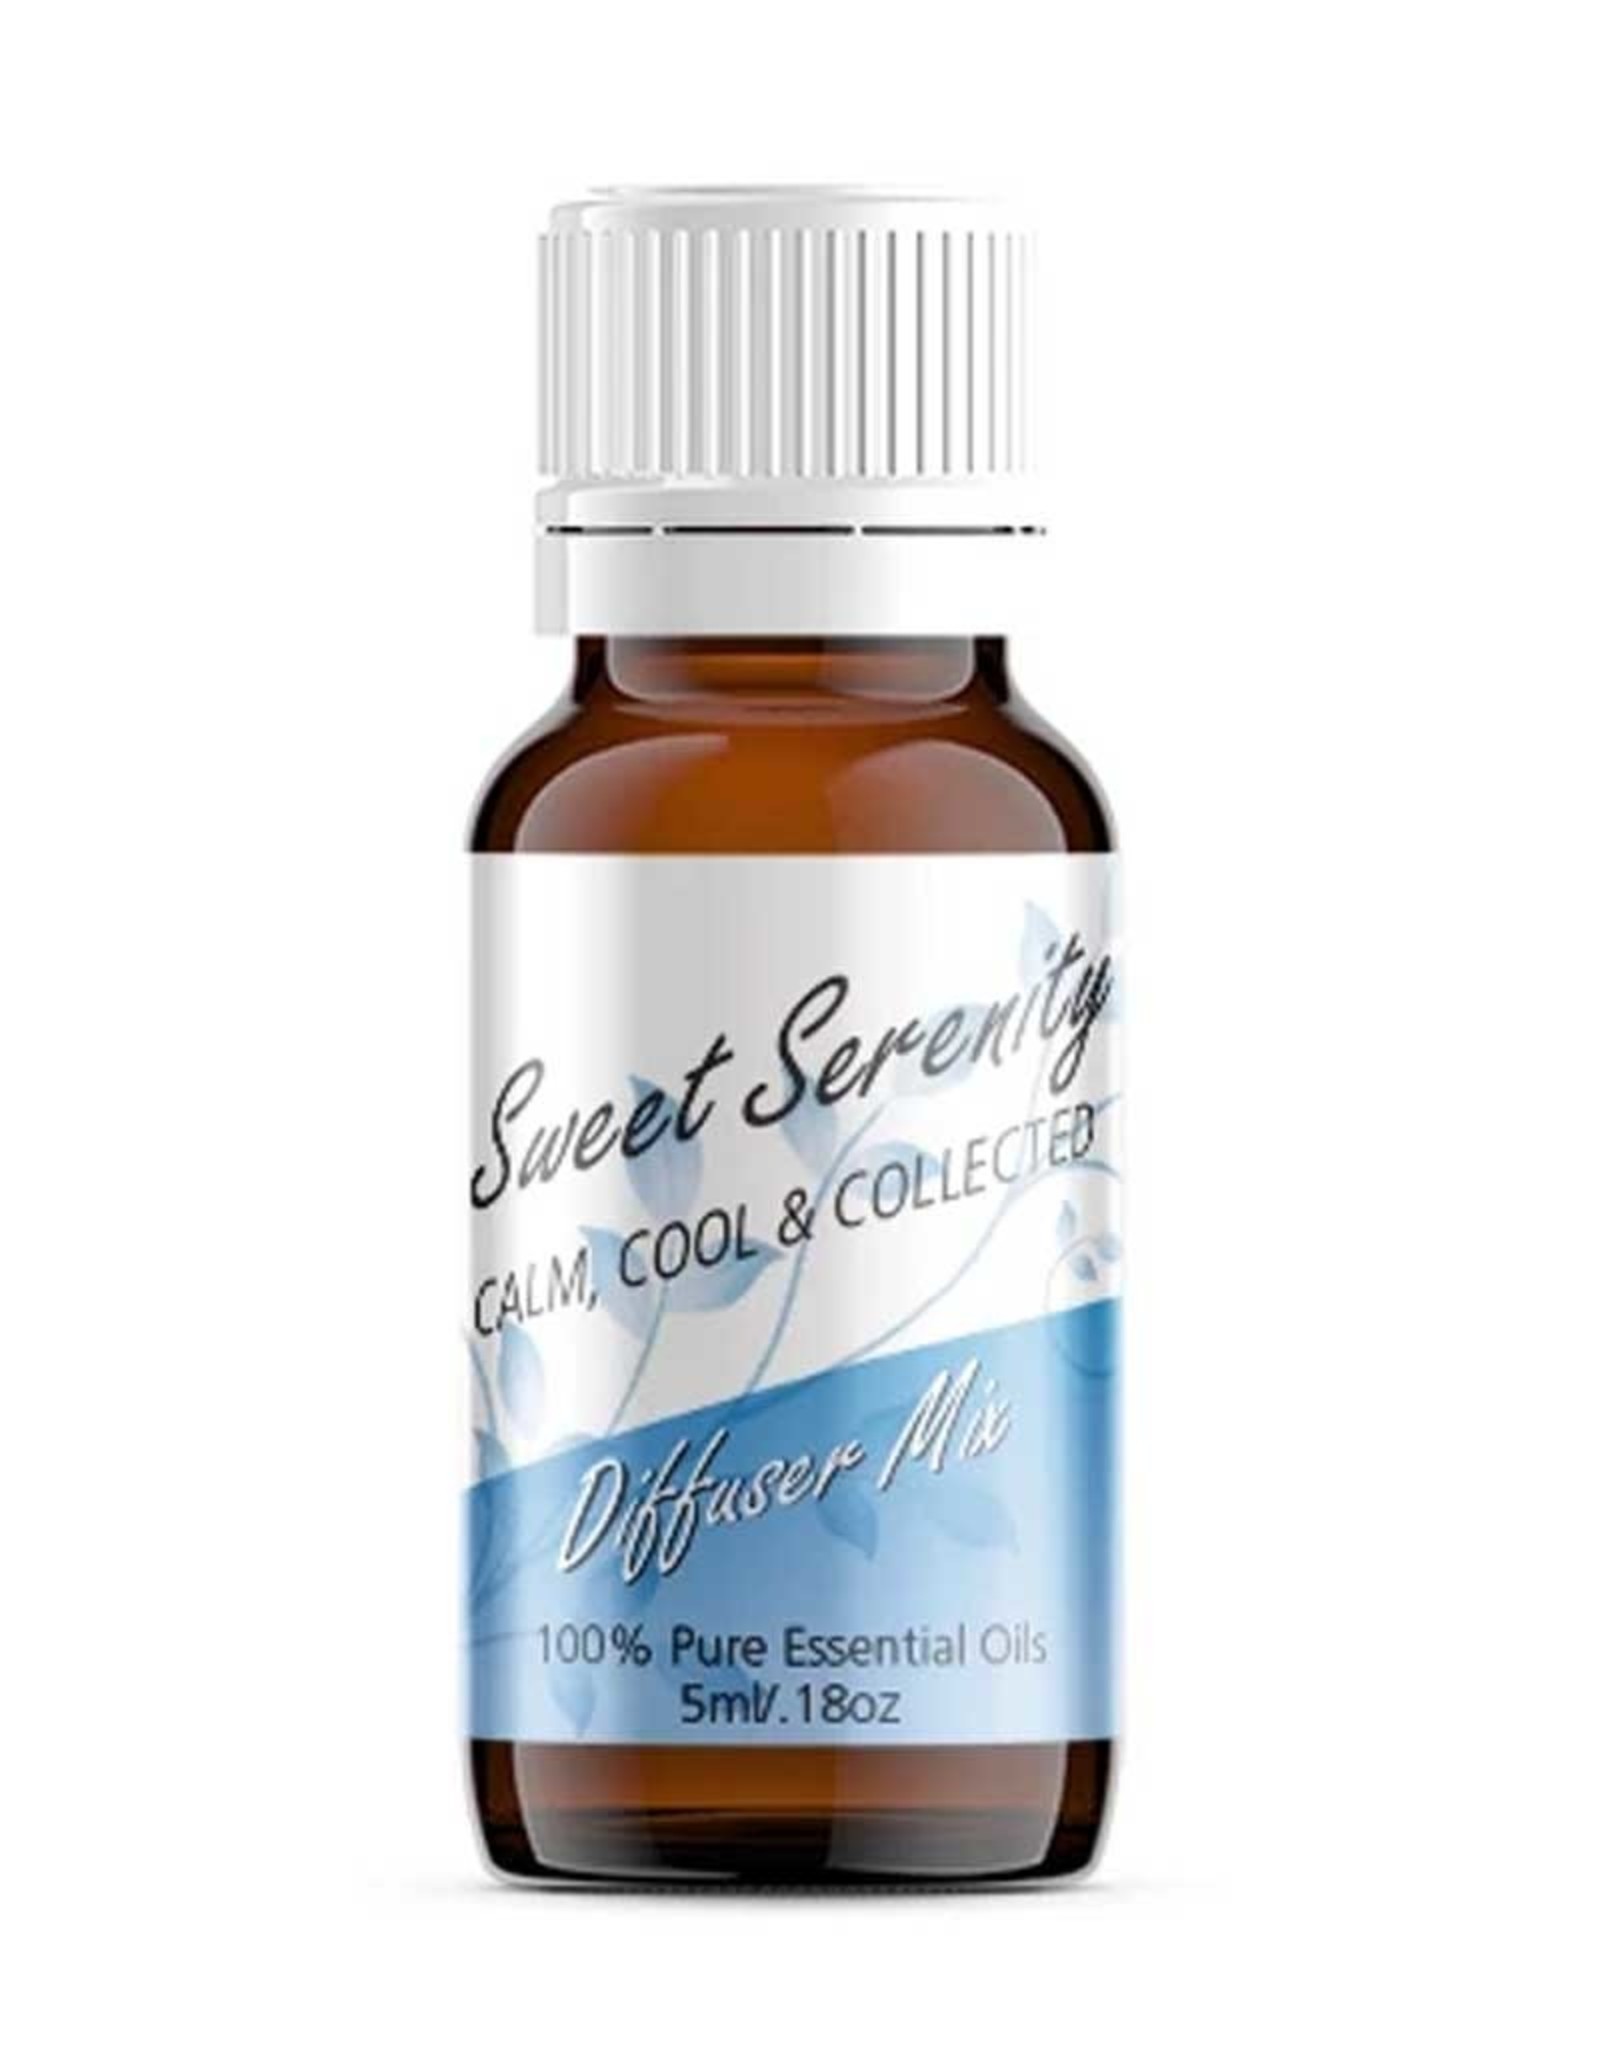 Colour Energy Diffuser Mix - Sweet Serenity 5ml